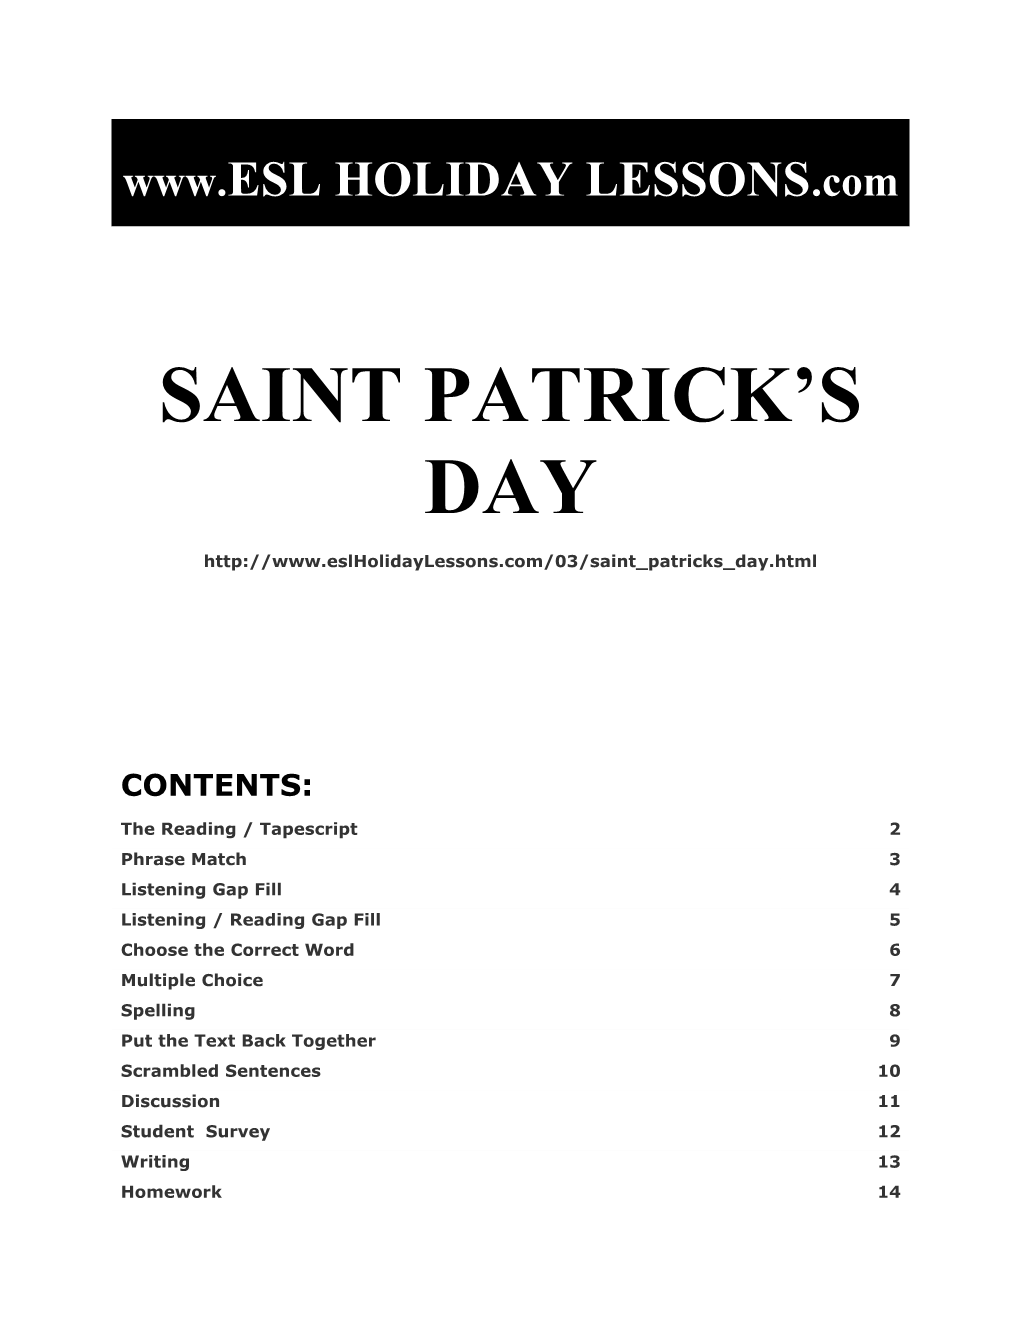 Holiday Lessons - Saint Patrick's Day